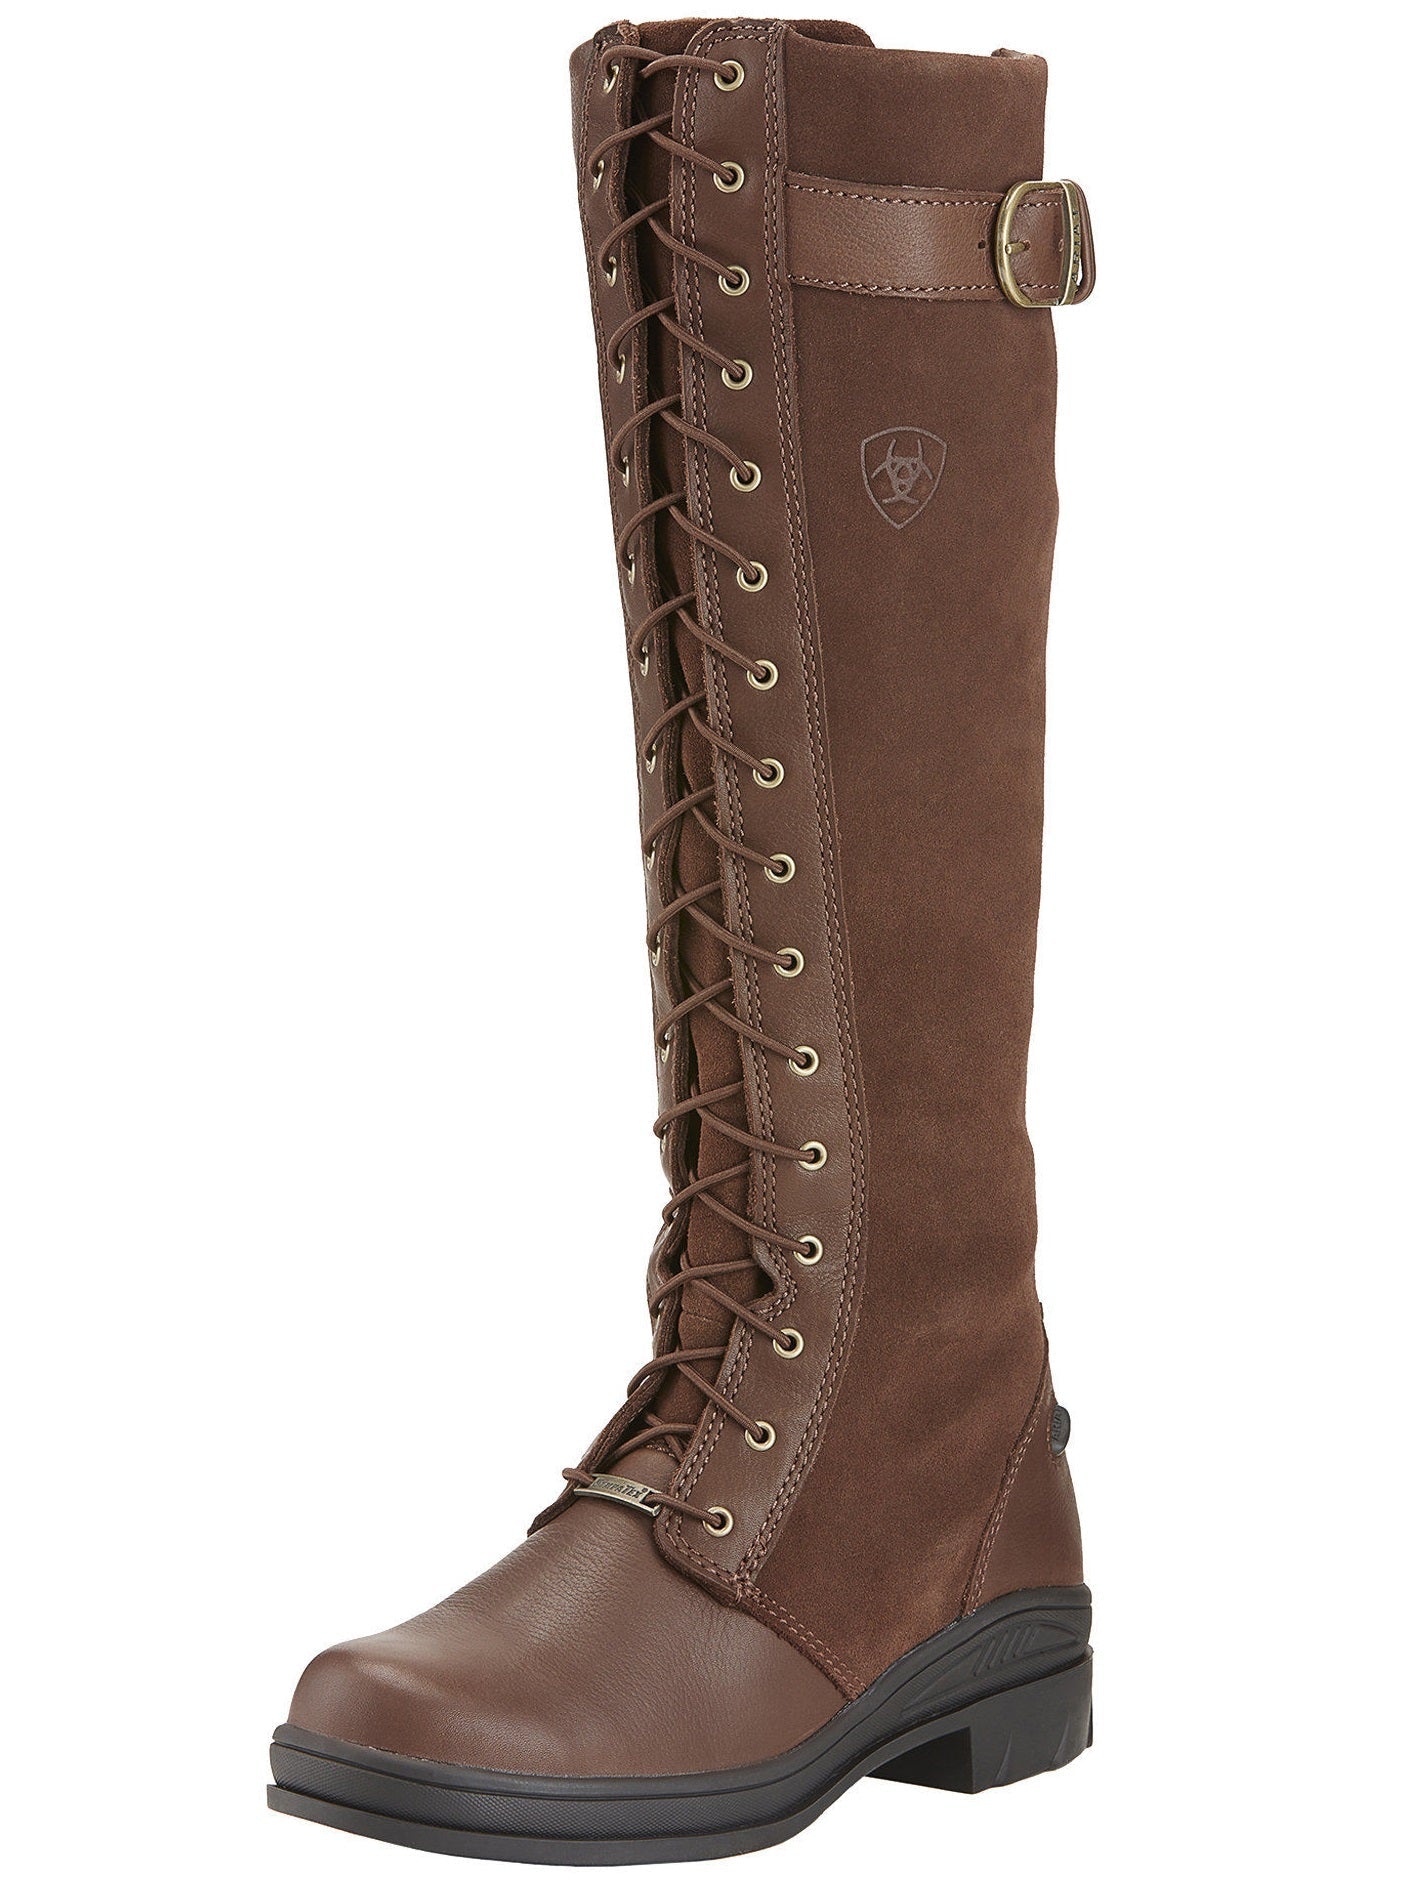 Ariat Boots - Womens Coniston H2O - Chocolate / Brown